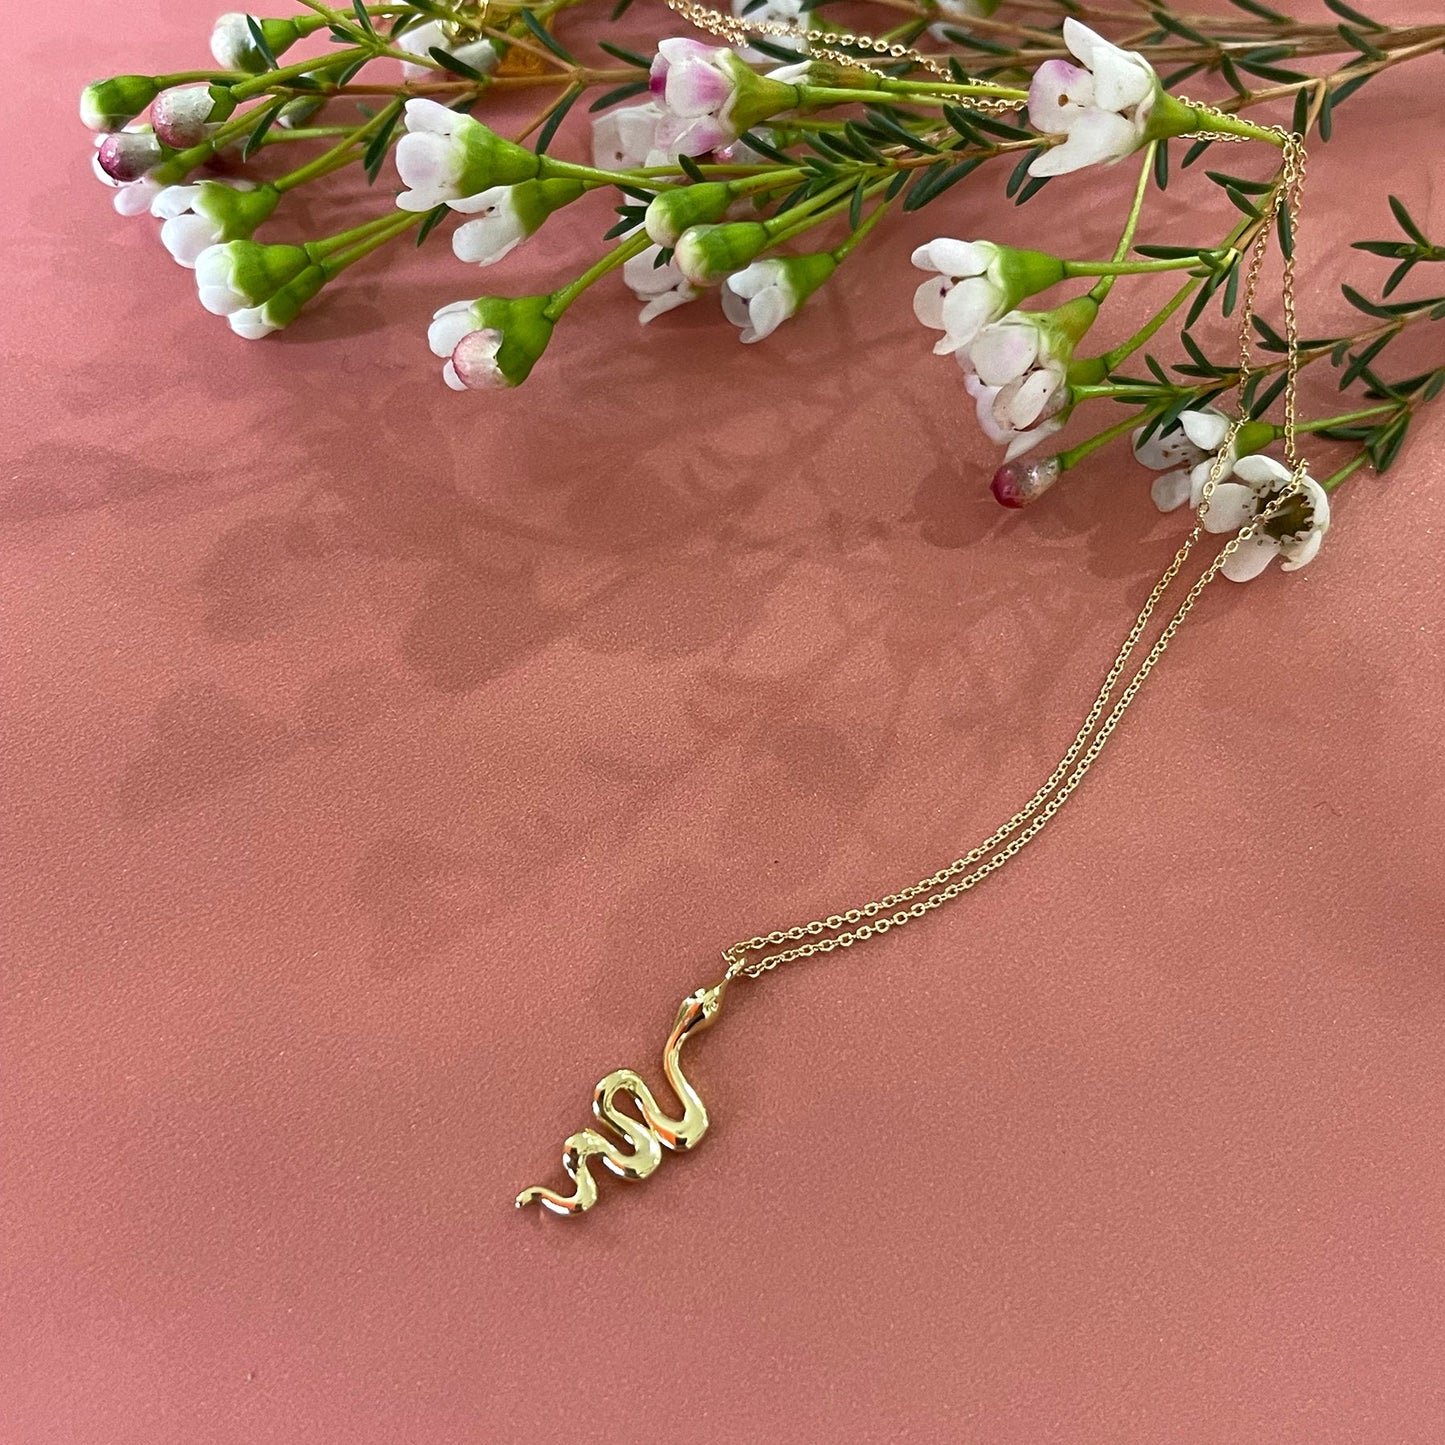 Mini Gold Serpent Necklace - Sunday Girl by Amy DiLamarraNecklace